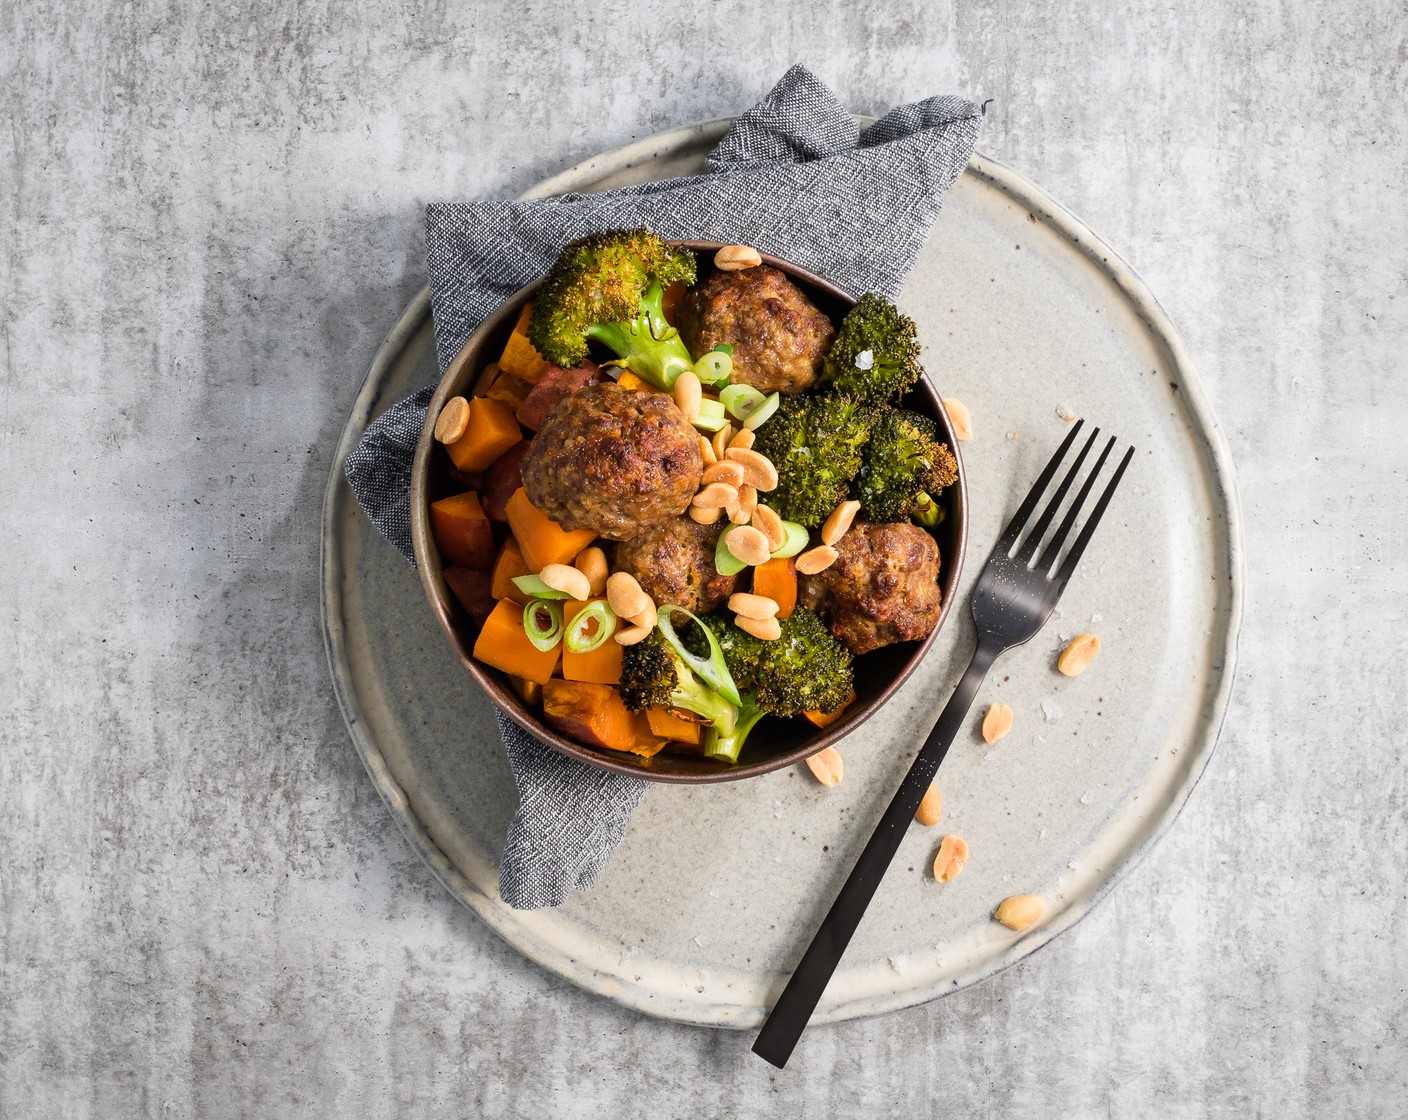 Beef Meatballs with Sweet Potatoes, Broccoli and Ginger Scallion Dressing